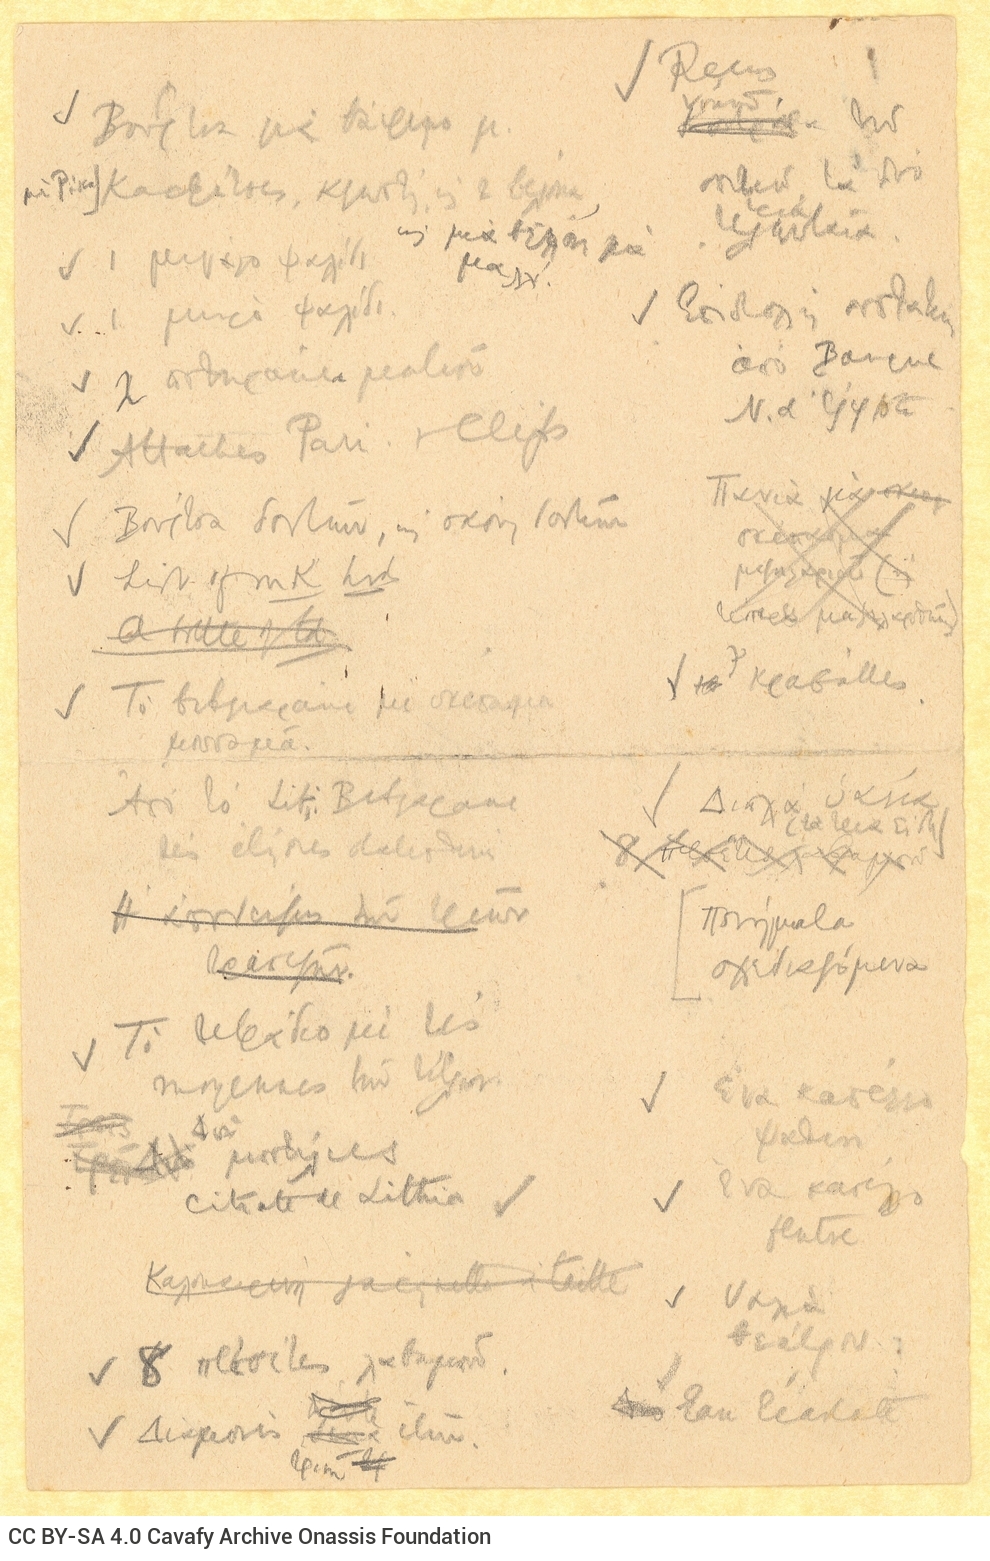 Handwritten list of garments and personal items, on both sides of a sheet and on the recto of a second sheet. Cancellation